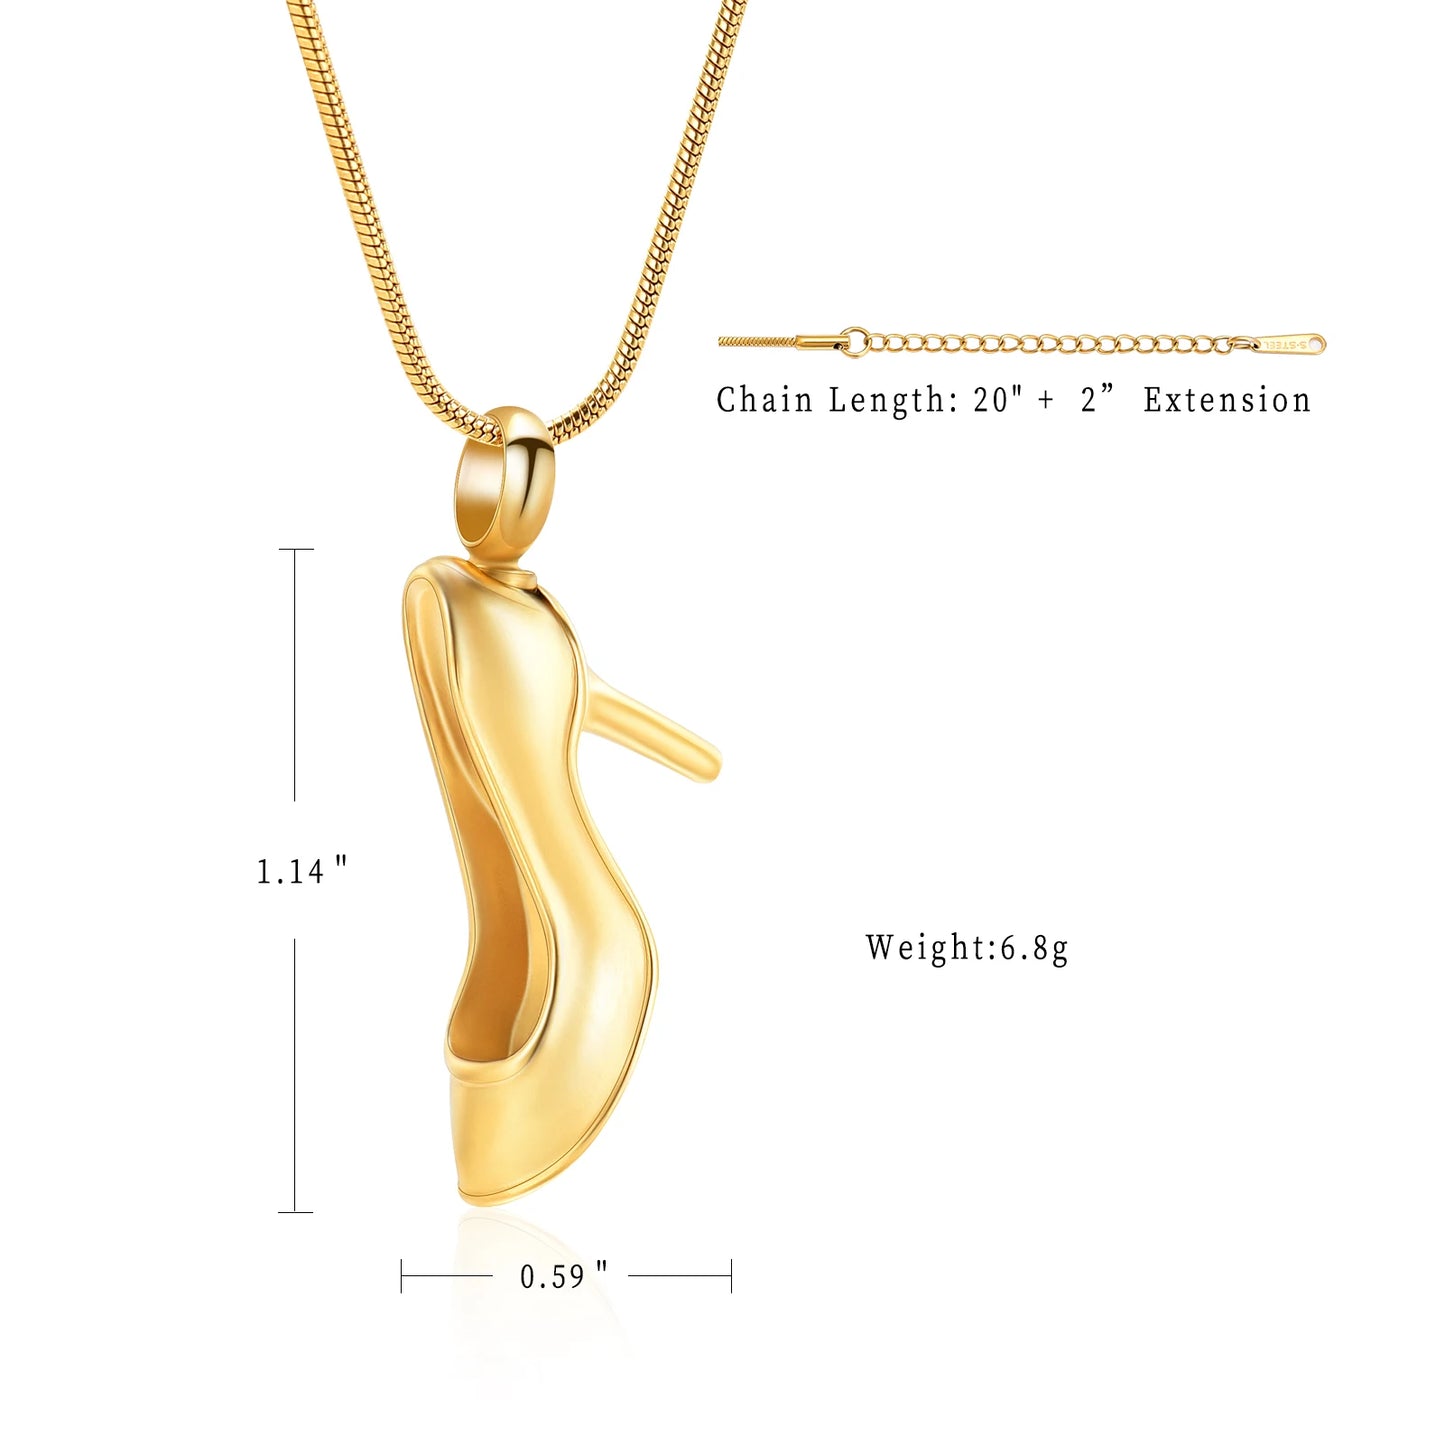 High Heel Shape Cremation Jewelry For Ashes Keepsake Pendant Necklace